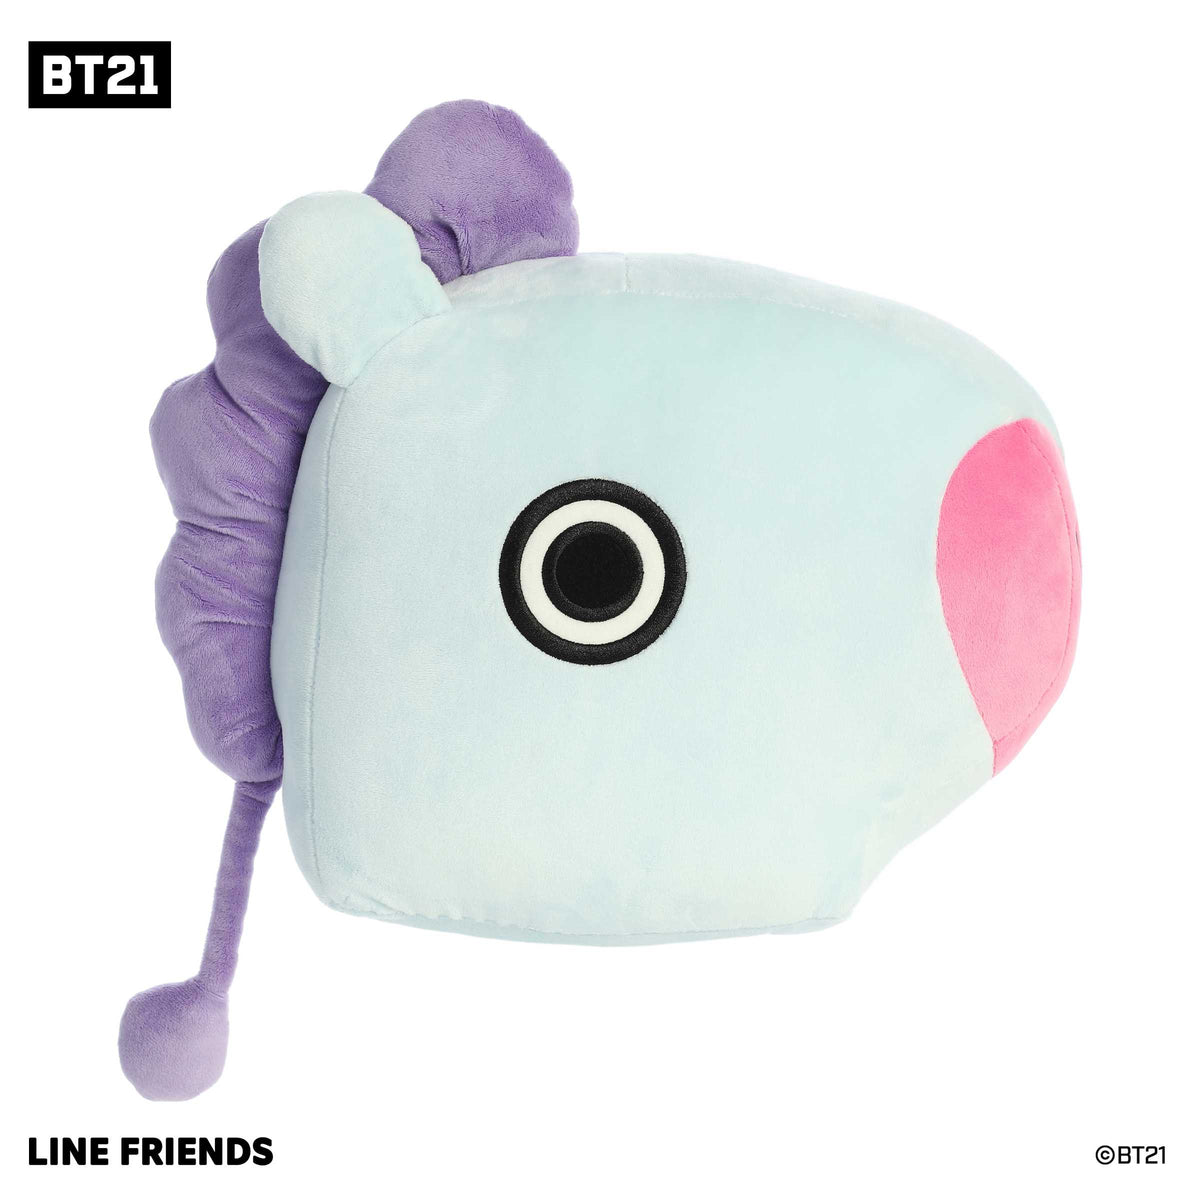 MANG Plush in dazzling blue with pink and purple accents, representing BT21's dancing aficionado with a mysterious mask.